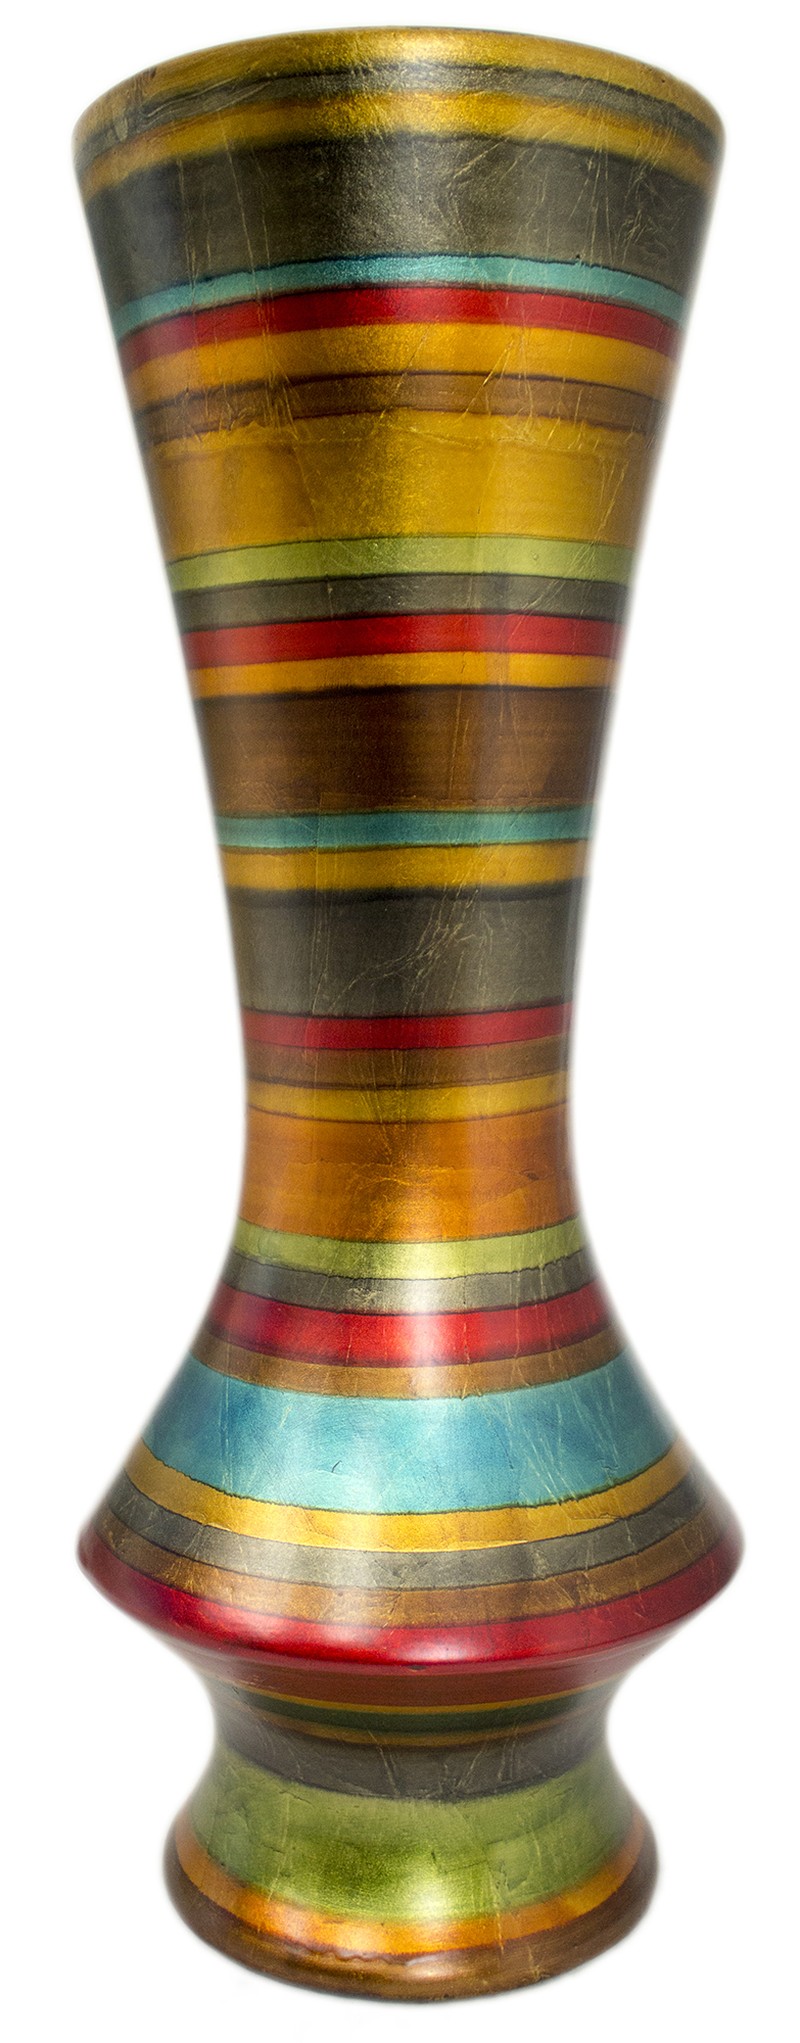 10" X 10" X 24" Gold, Bronze, Copper, Pewter, Red, Green And Blue Ceramic Floor Vase